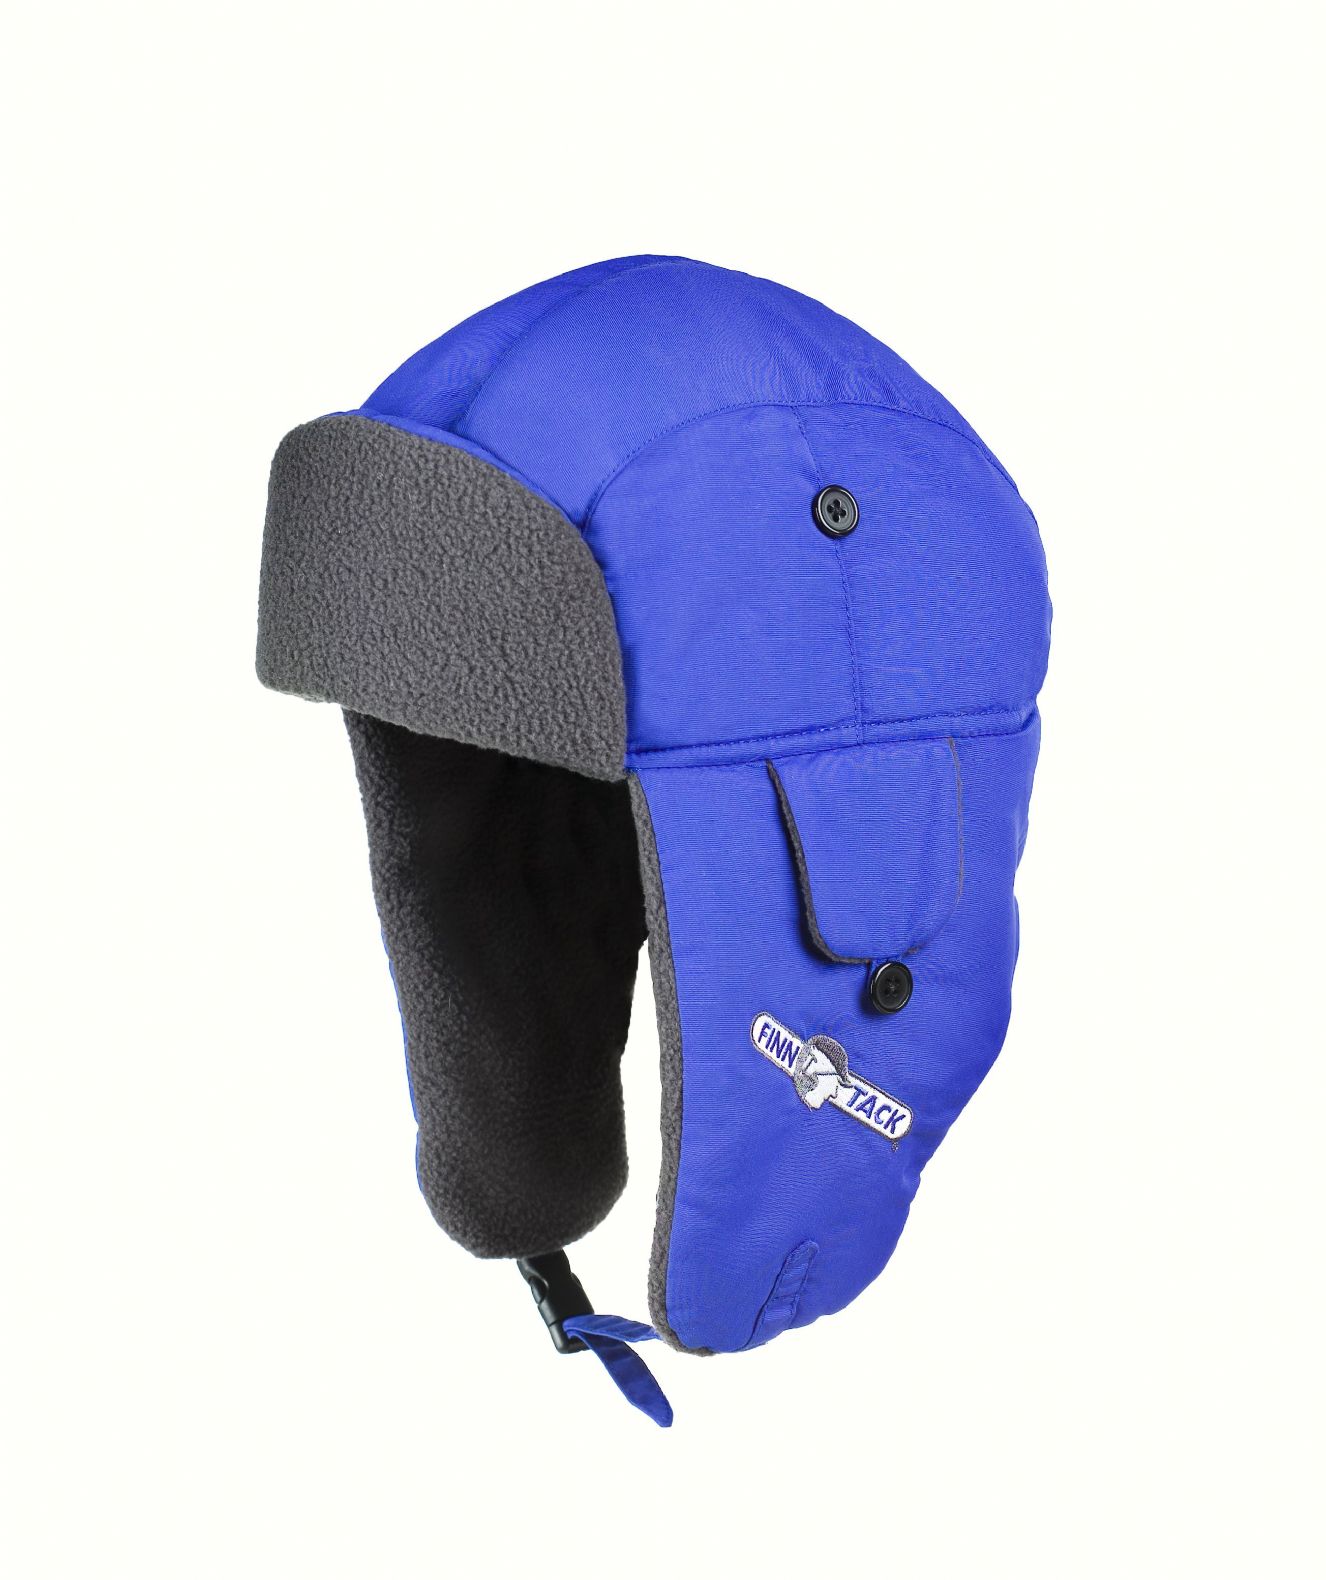 FinnTack Trainers Winter Hat 15 Off